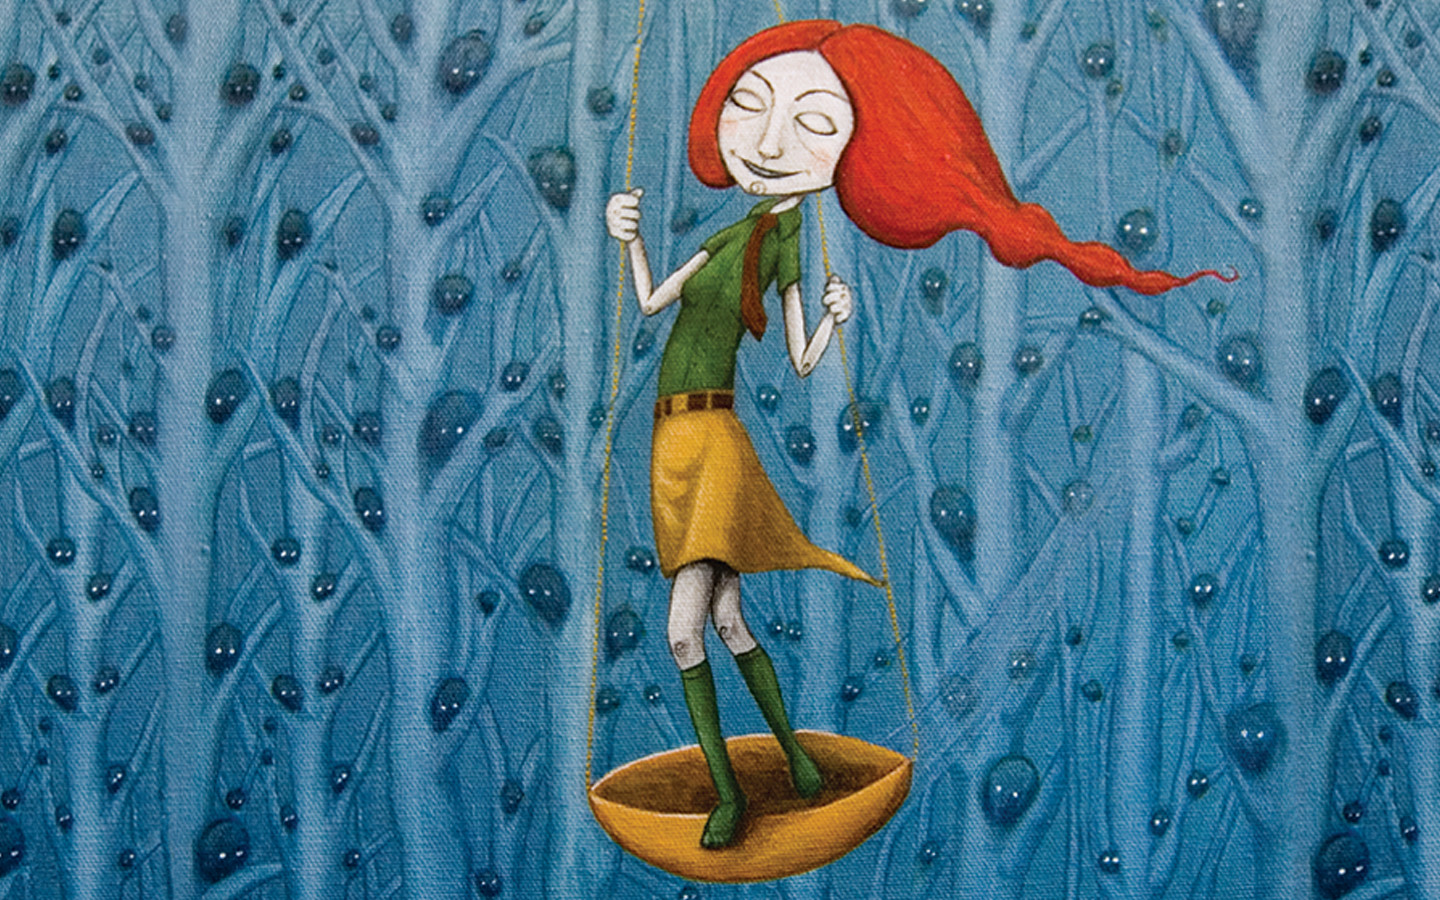 Painting in acrylics of a girl on a scale-like a swing. Swooshing by critter filled blue trees.